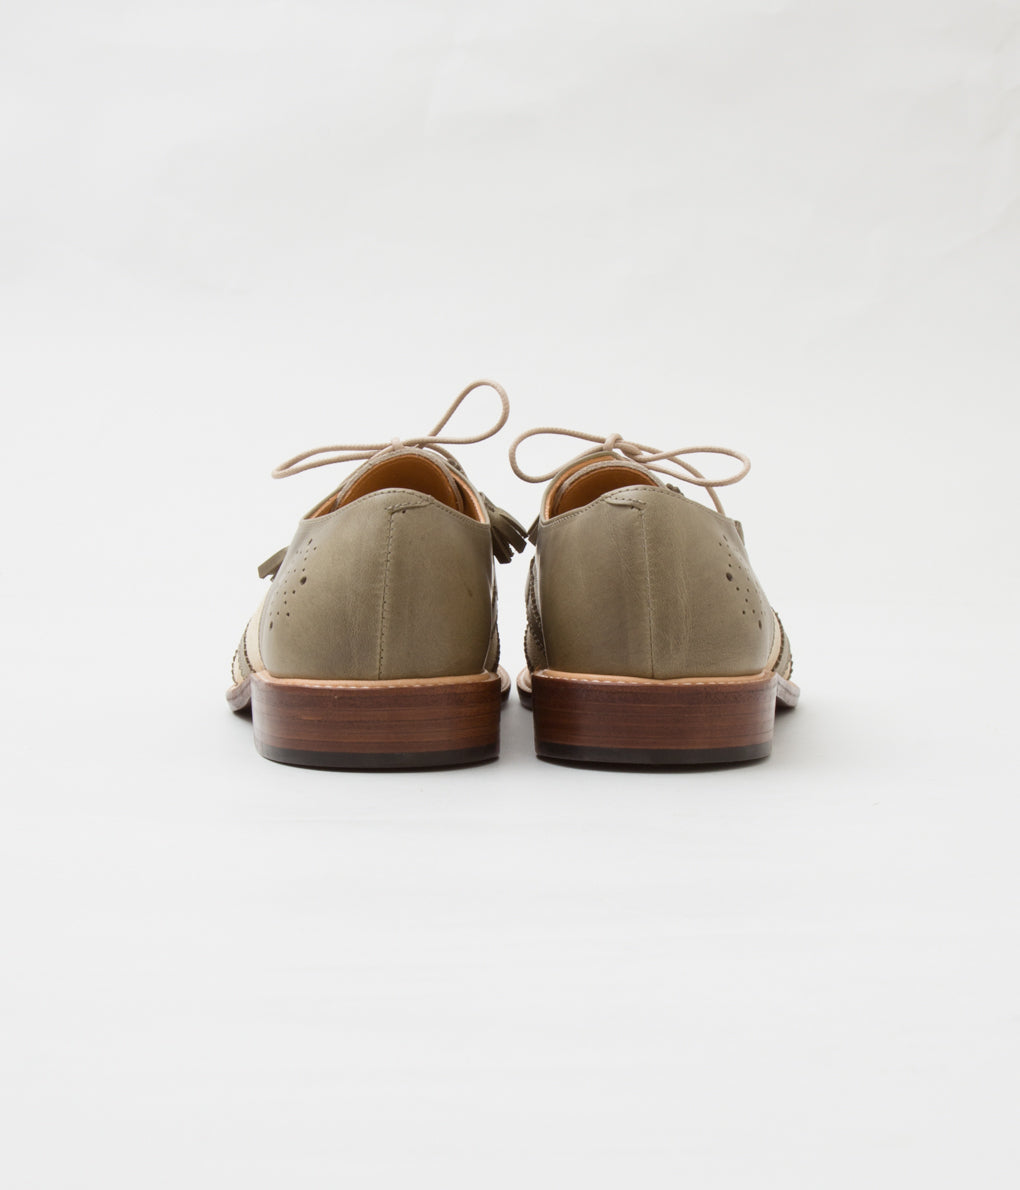 THE OLD CURIOSITY SHOP "#13843 CLASSIC GILLIE SHOES" (OLIVE)